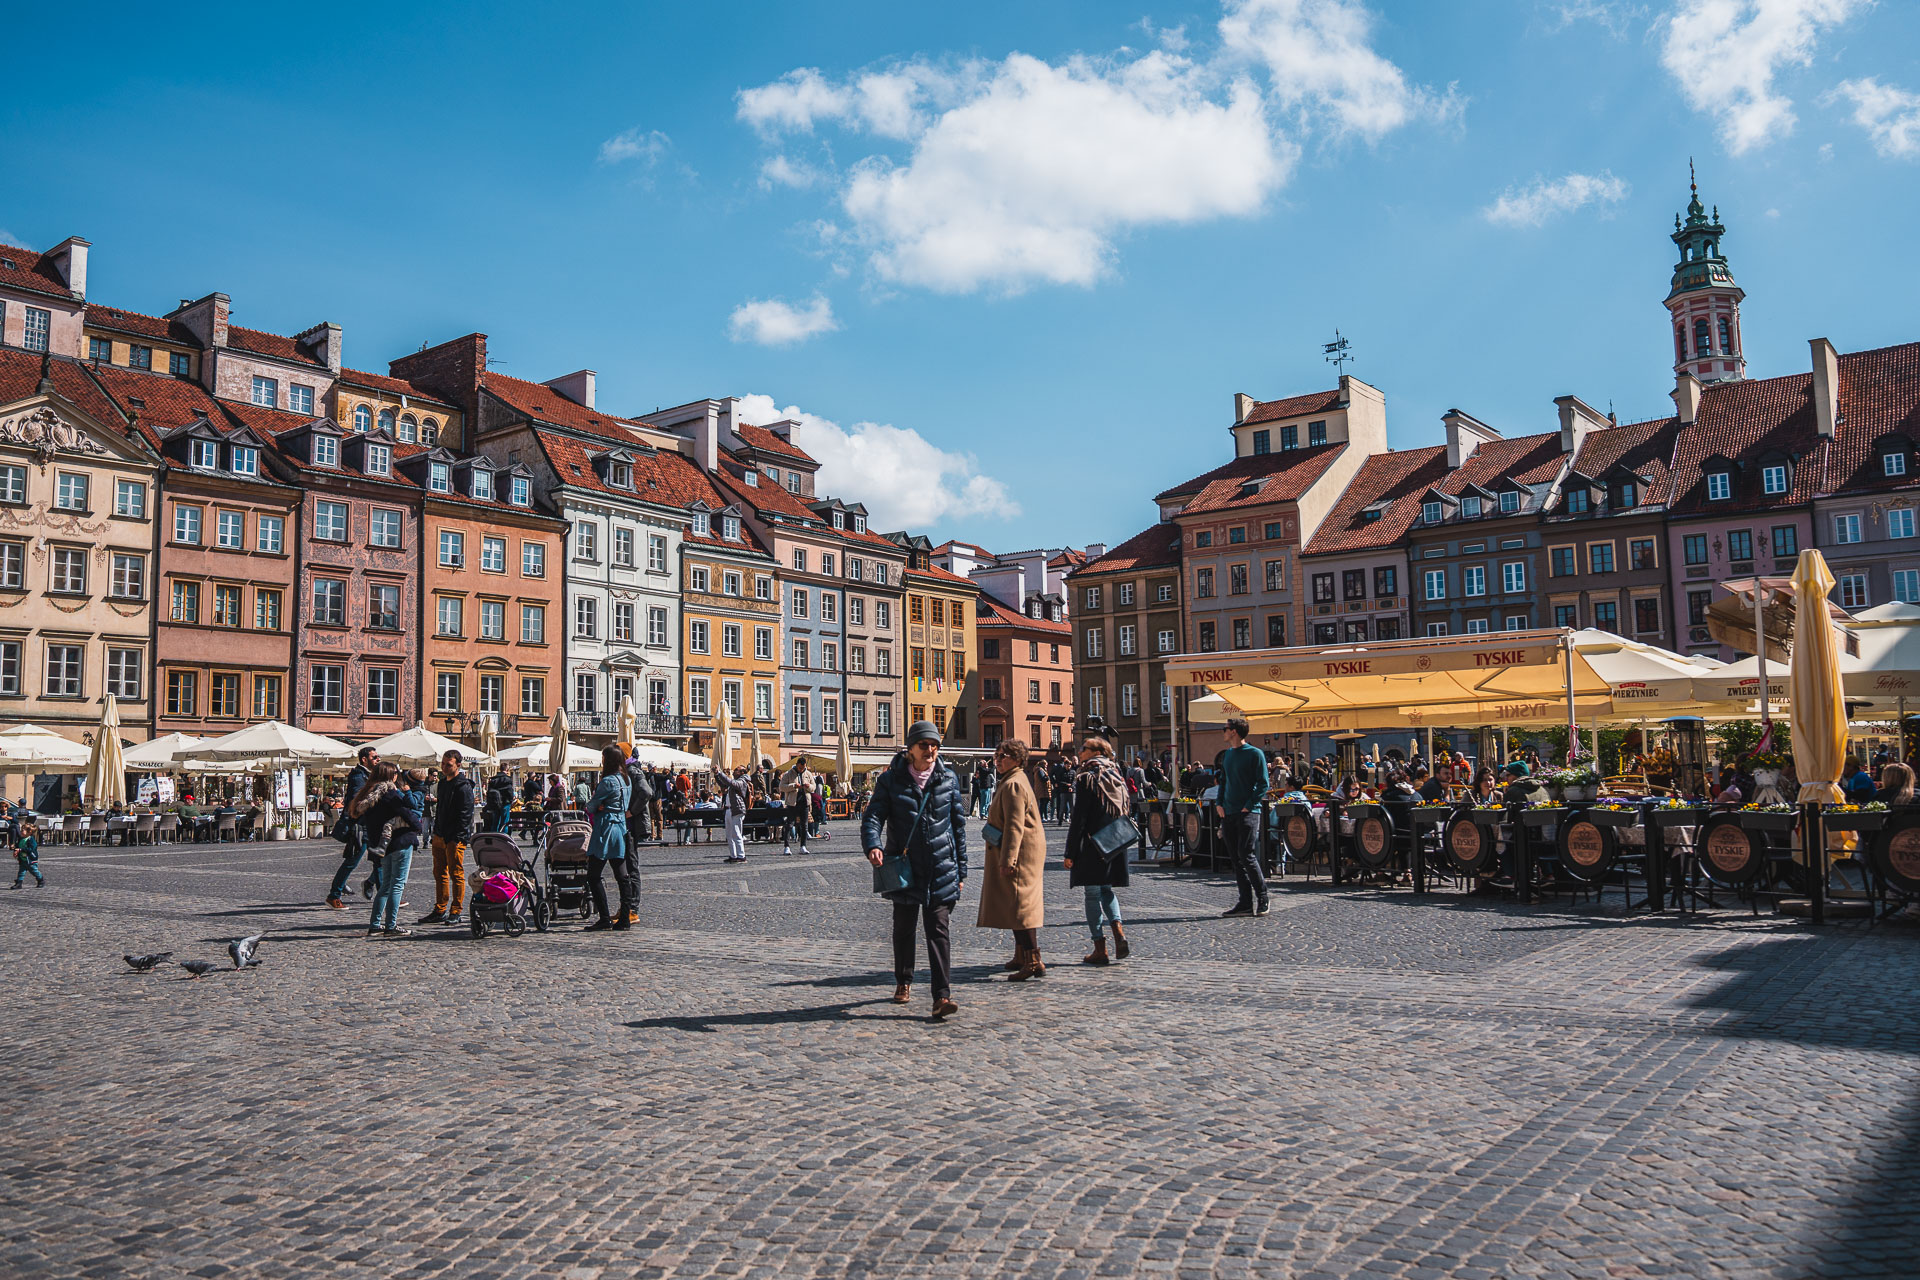 Warsaw, one of the best cities to visit in Poland